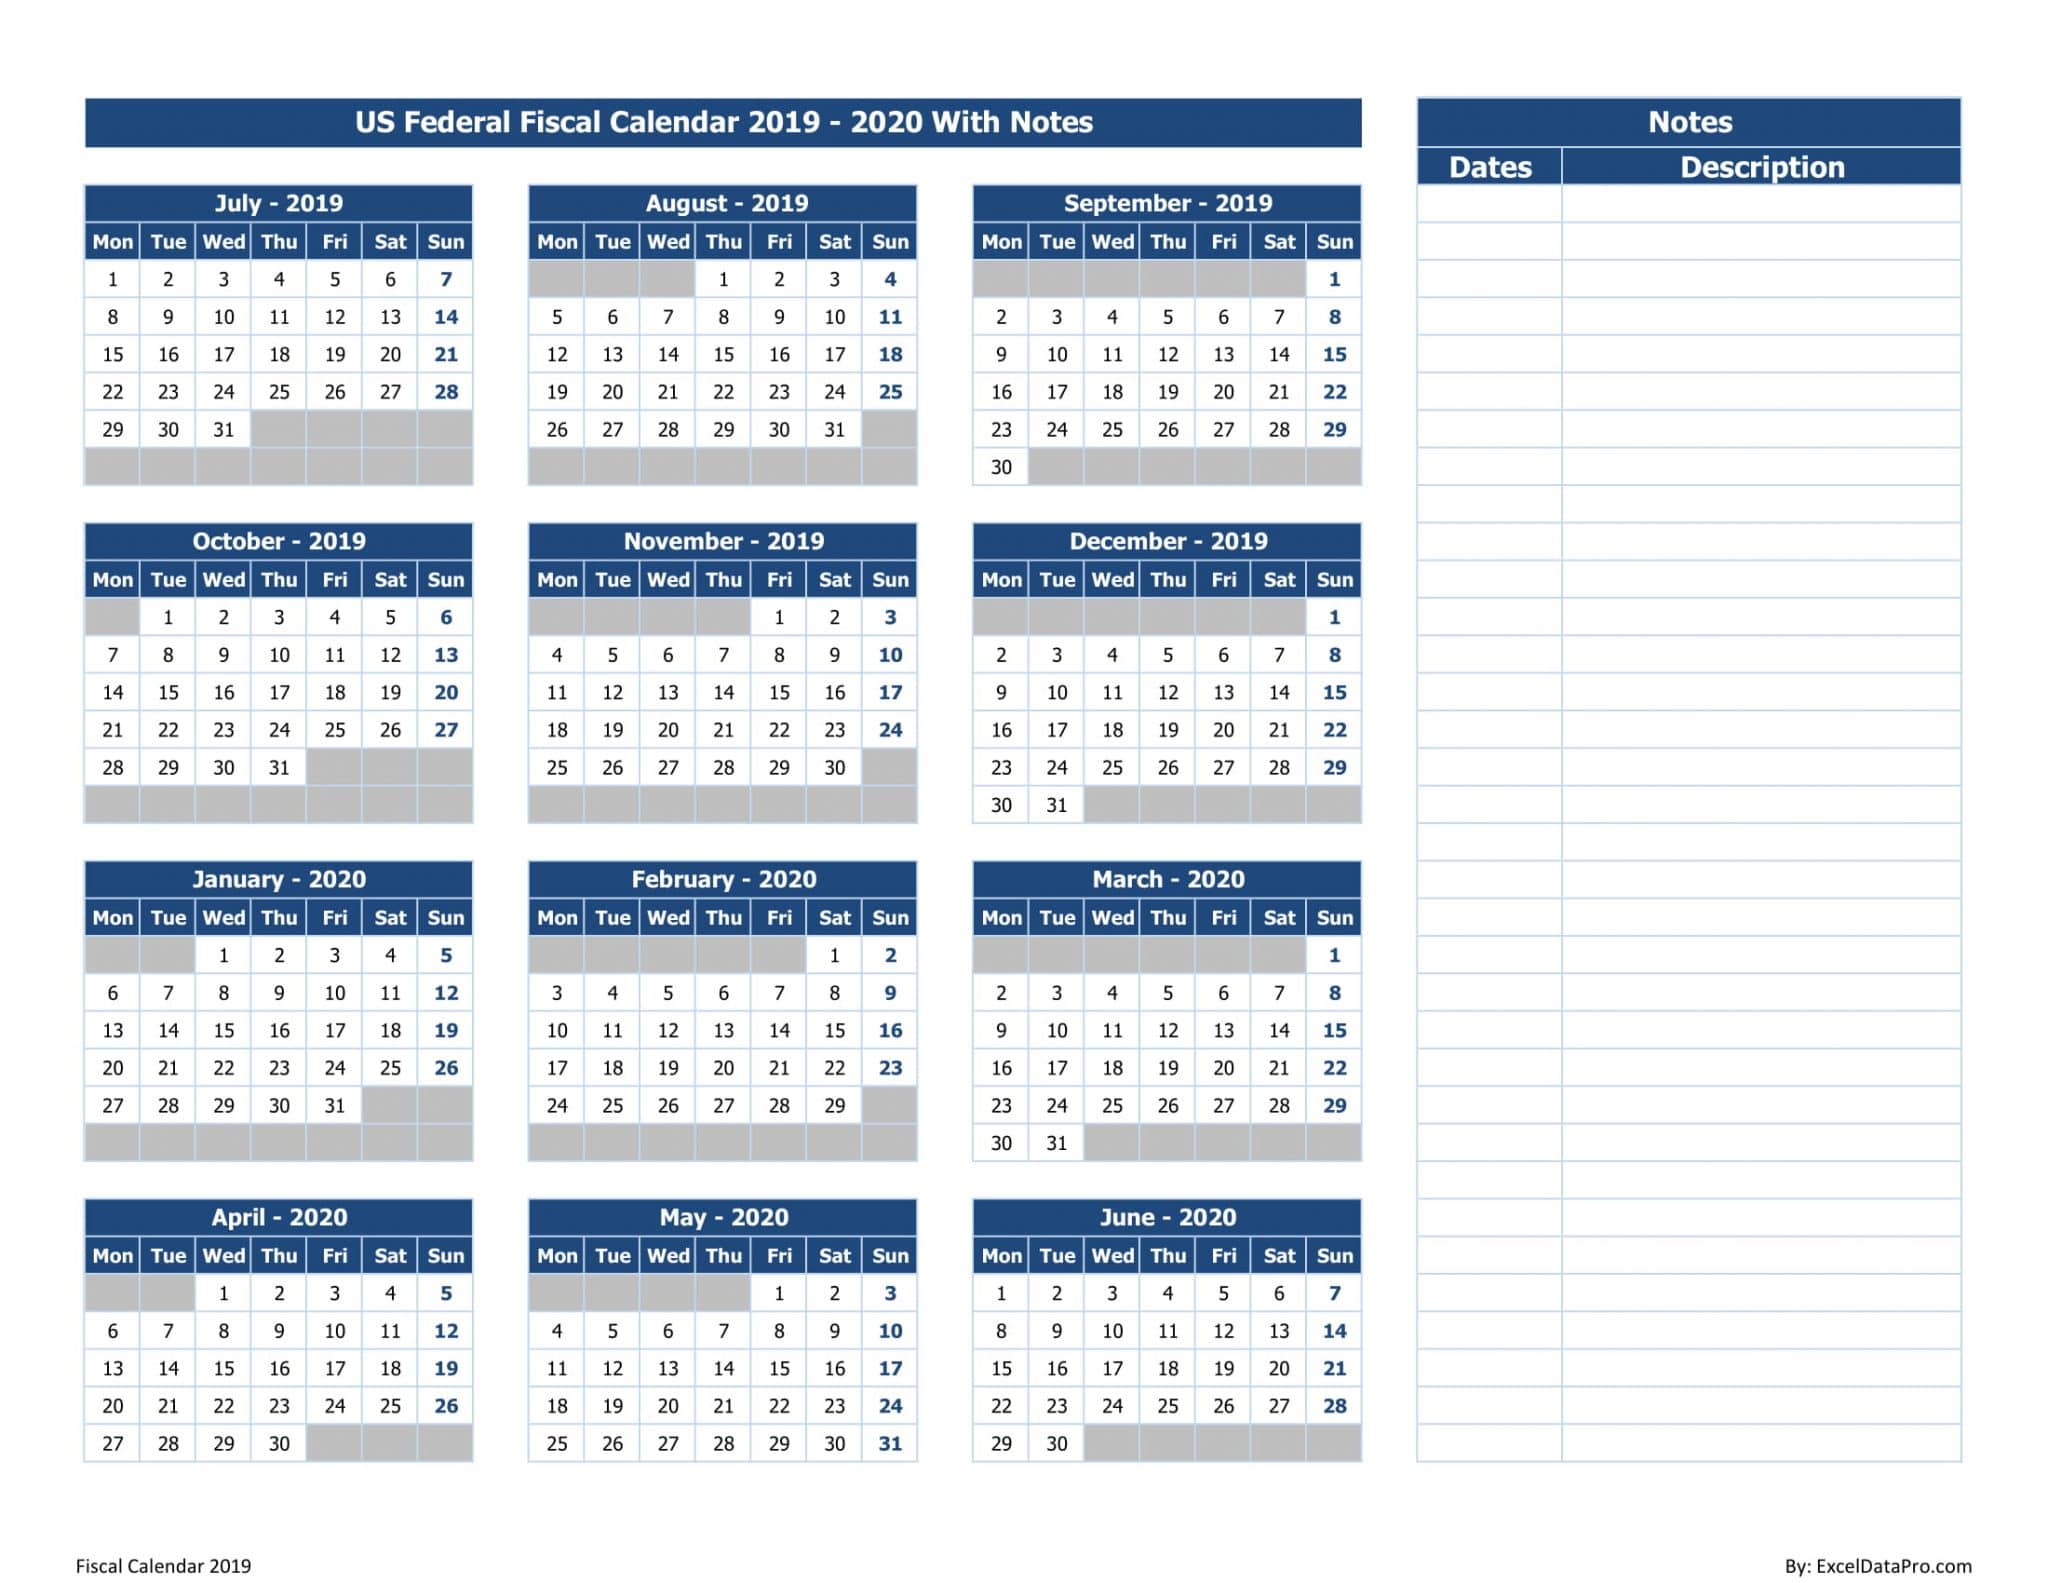 US Federal Fiscal Calendar 2019-20 With Notes